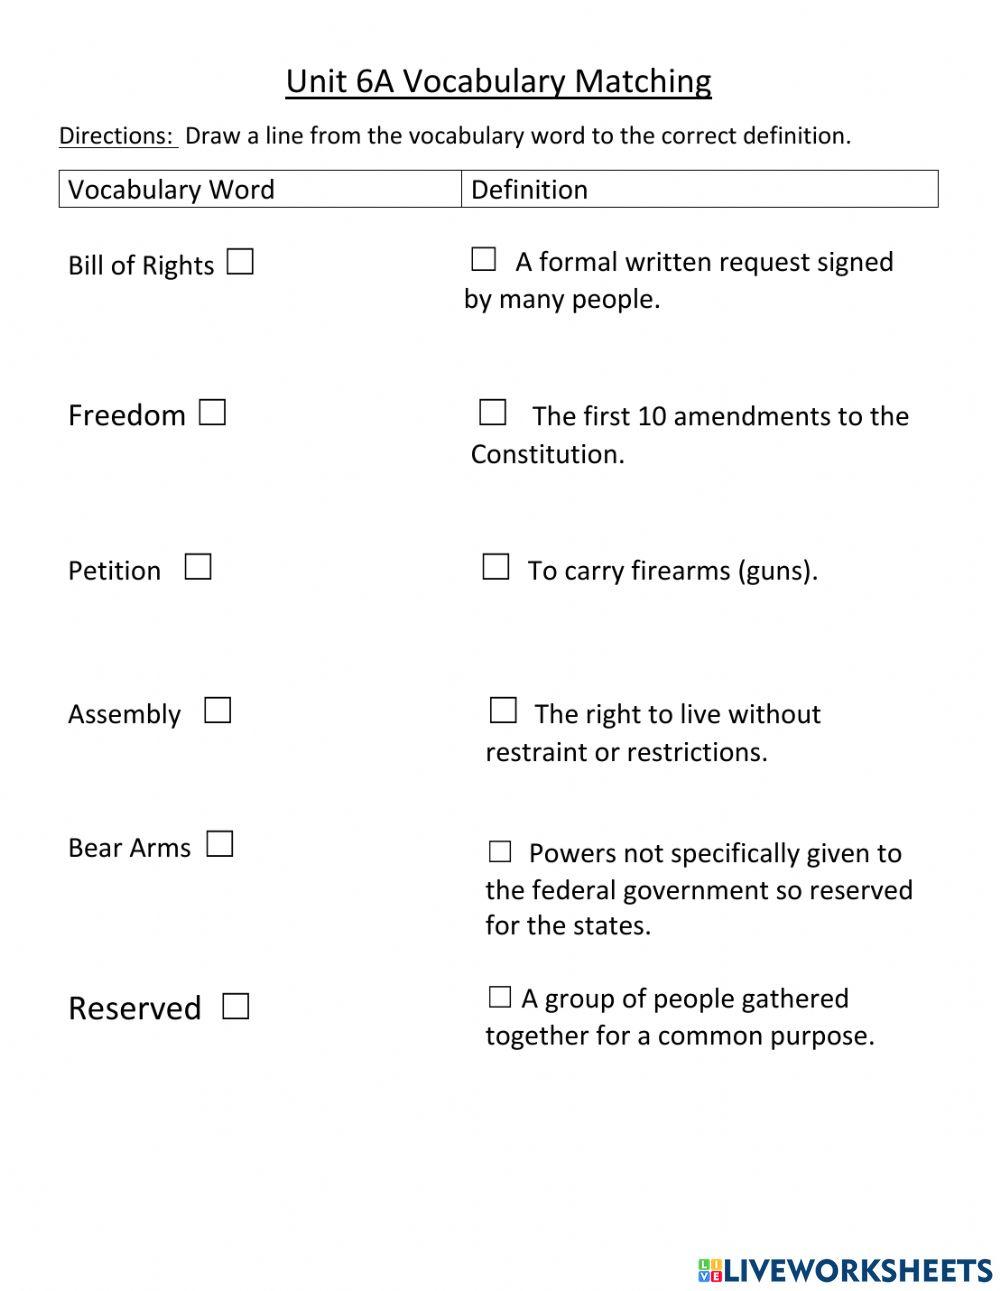 Unit 6A Bill of Rights Vocabulary Matching